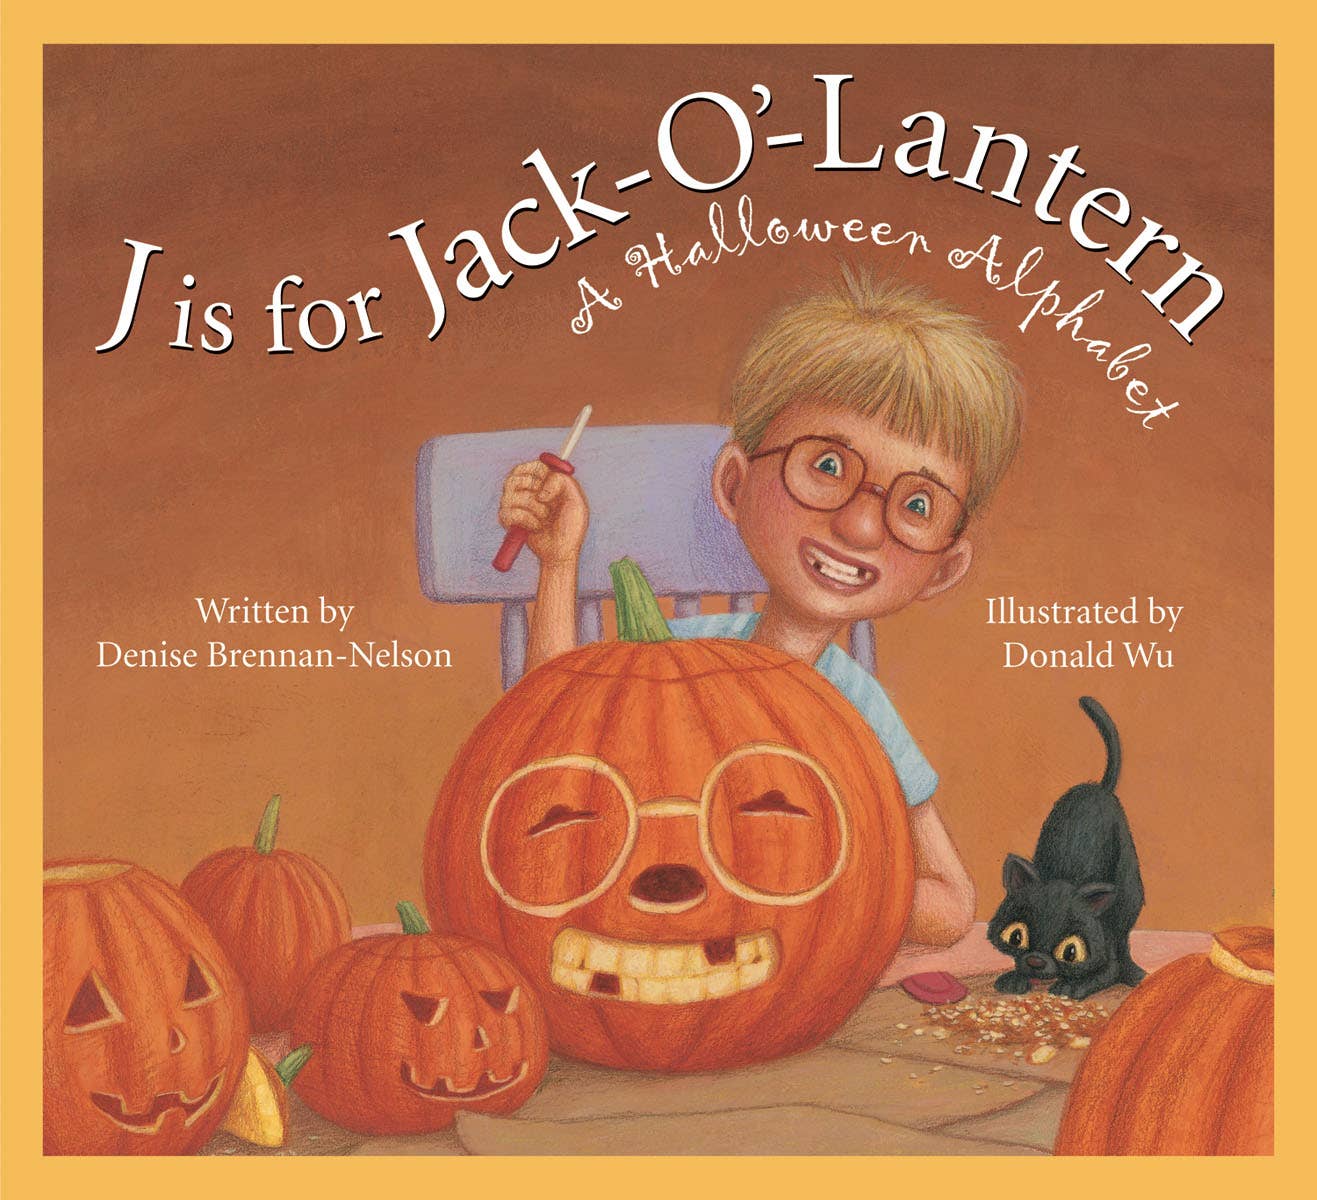 Sleeping Bear Press - J is for Jack-O-Lantern: A Halloween picture book